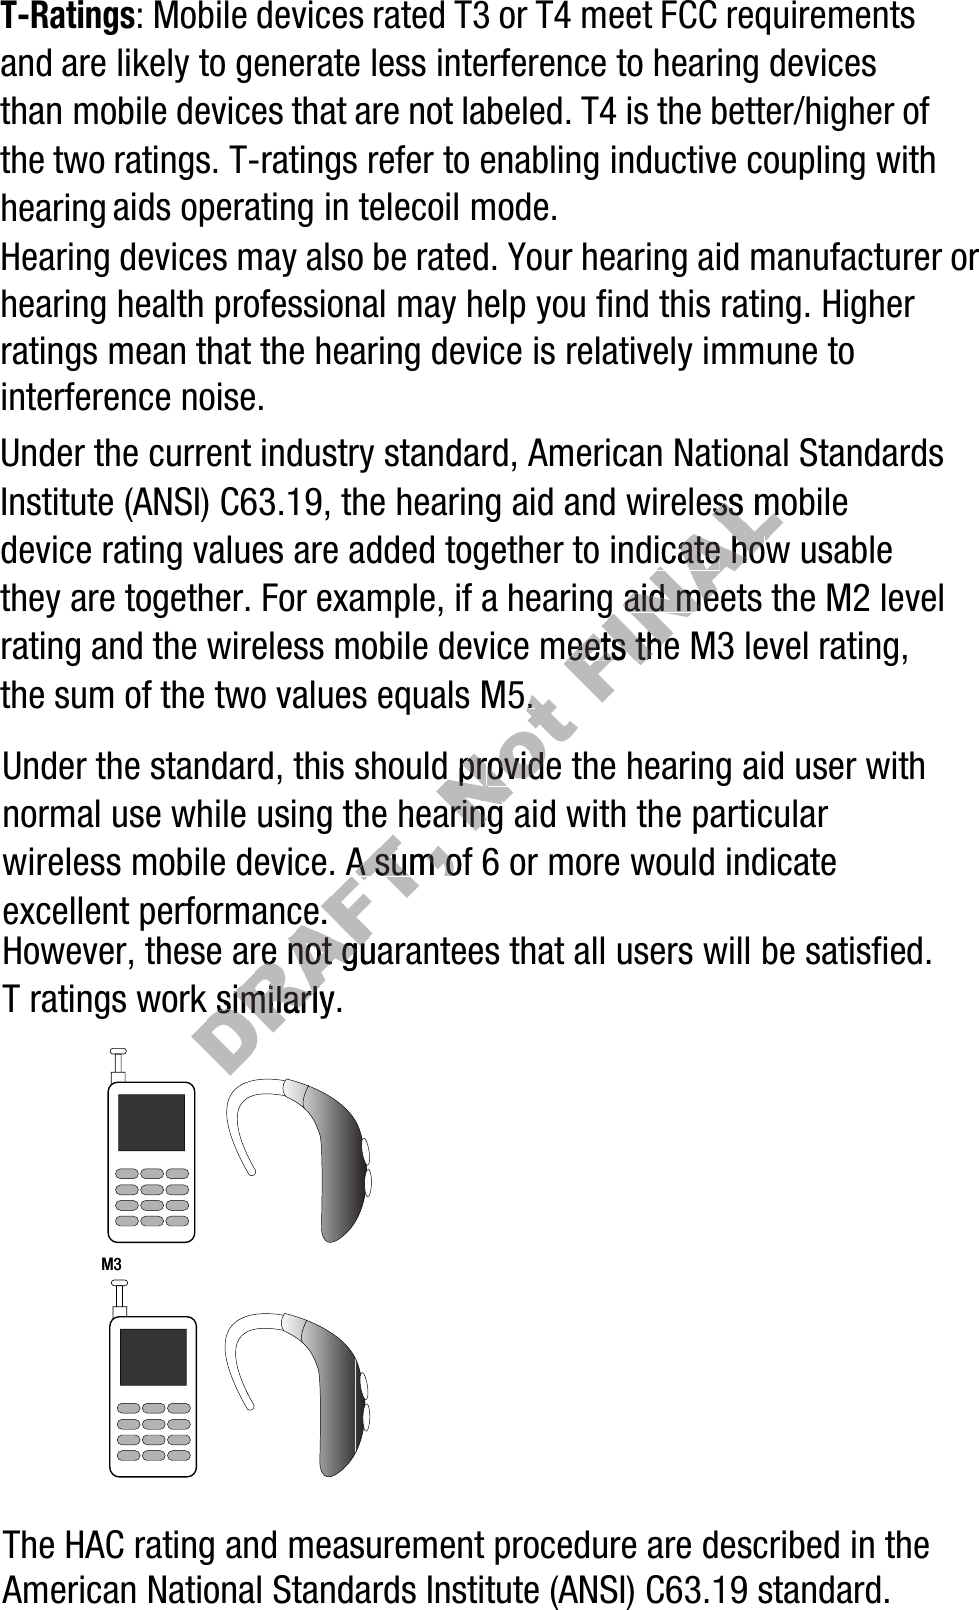 T-Ratings: Mobile devices rated T3 or T4 meet FCC requirements and are likely to generate less interference to hearing devices than mobile devices that are not labeled. T4 is the better/higher of the two ratings. T-ratings refer to enabling inductive coupling with hearing aids operating in telecoil mode.Hearing devices may also be rated. Your hearing aid manufacturer or hearing health professional may help you find this rating. Higher ratings mean that the hearing device is relatively immune to interference noise. Under the current industry standard, American National Standards Institute (ANSI) C63.19, the hearing aid and wireless mobile device rating values are added together to indicate how usable they are together. For example, if a hearing aid meets the M2 level rating and the wireless mobile device meets the M3 level rating, the sum of the two values equals M5. Under the standard, this should provide the hearing aid user with normal use while using the hearing aid with the particular wireless mobile device. A sum of 6 or more would indicate excellent performance.  However, these are not guarantees that all users will be satisfied. T ratings work similarly.The HAC rating and measurement procedure are described in the American National Standards Institute (ANSI) C63.19 standard.    M3       M3        DRAFT, the hearingthe hearingdevice. A sum ofdevice. A sum ofperformance.  performance.  these are not guarantees thatthese are not guarantees thatDRAFT, work similarly.work similarly.DRAFT, DRAFT, Not  equals M5. .  pr provide ovide the hearingthe hearingFINALhearing aid and wireless mobile hearing aid and wireless mobile dicatedicate ho howwing ing aid meetsaid meetsmobile device meets the M3 levemobile device meets the M3 leve